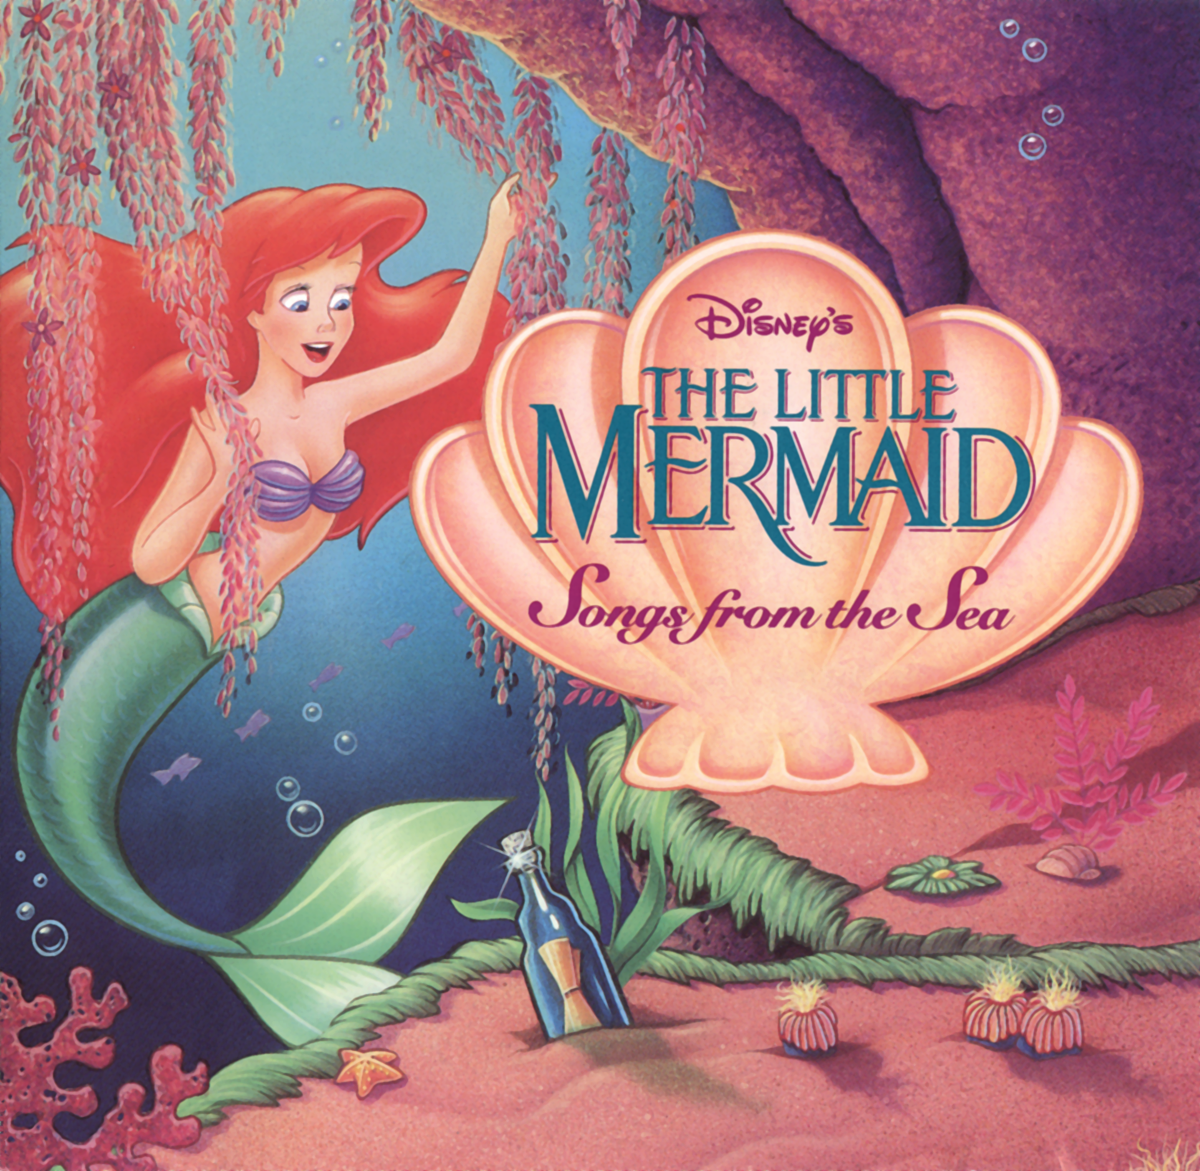 https://static.wikia.nocookie.net/disney/images/e/ed/Songs_from_the_sea.png/revision/latest?cb=20150714130301